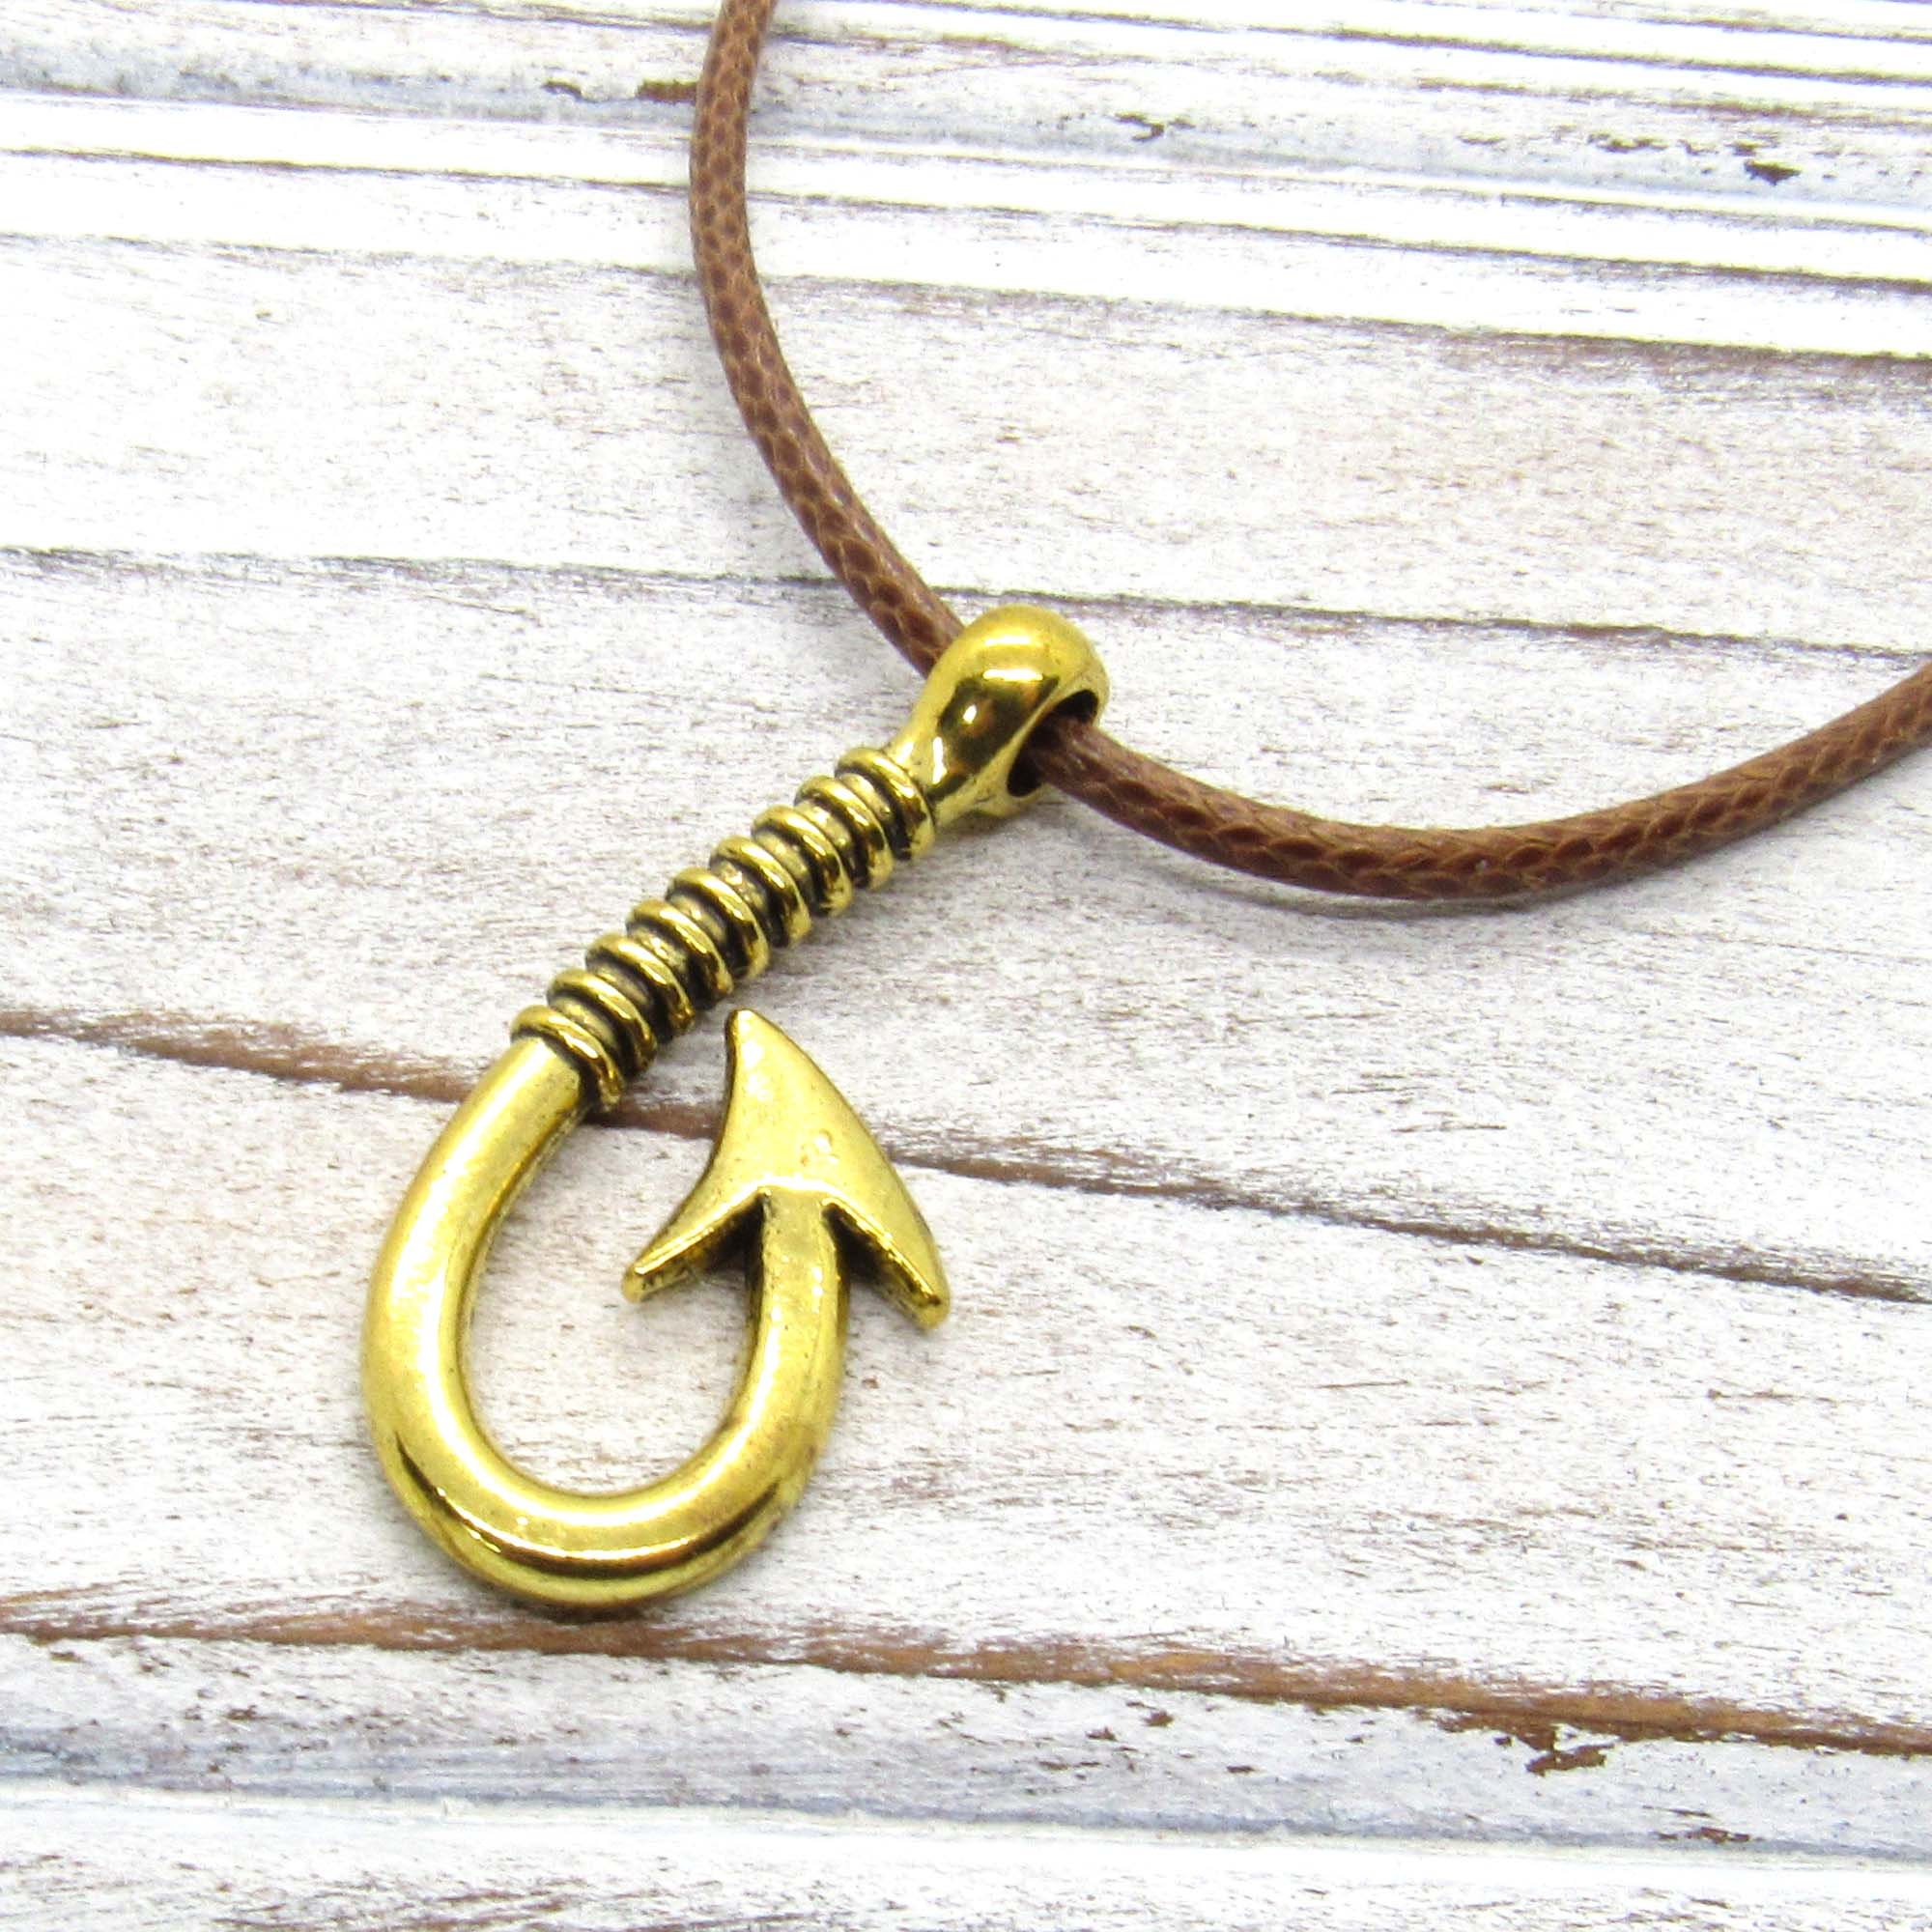 Fisherman's Fish Hook Tool Clip on Pendant Charm for Bracelet or Necklace